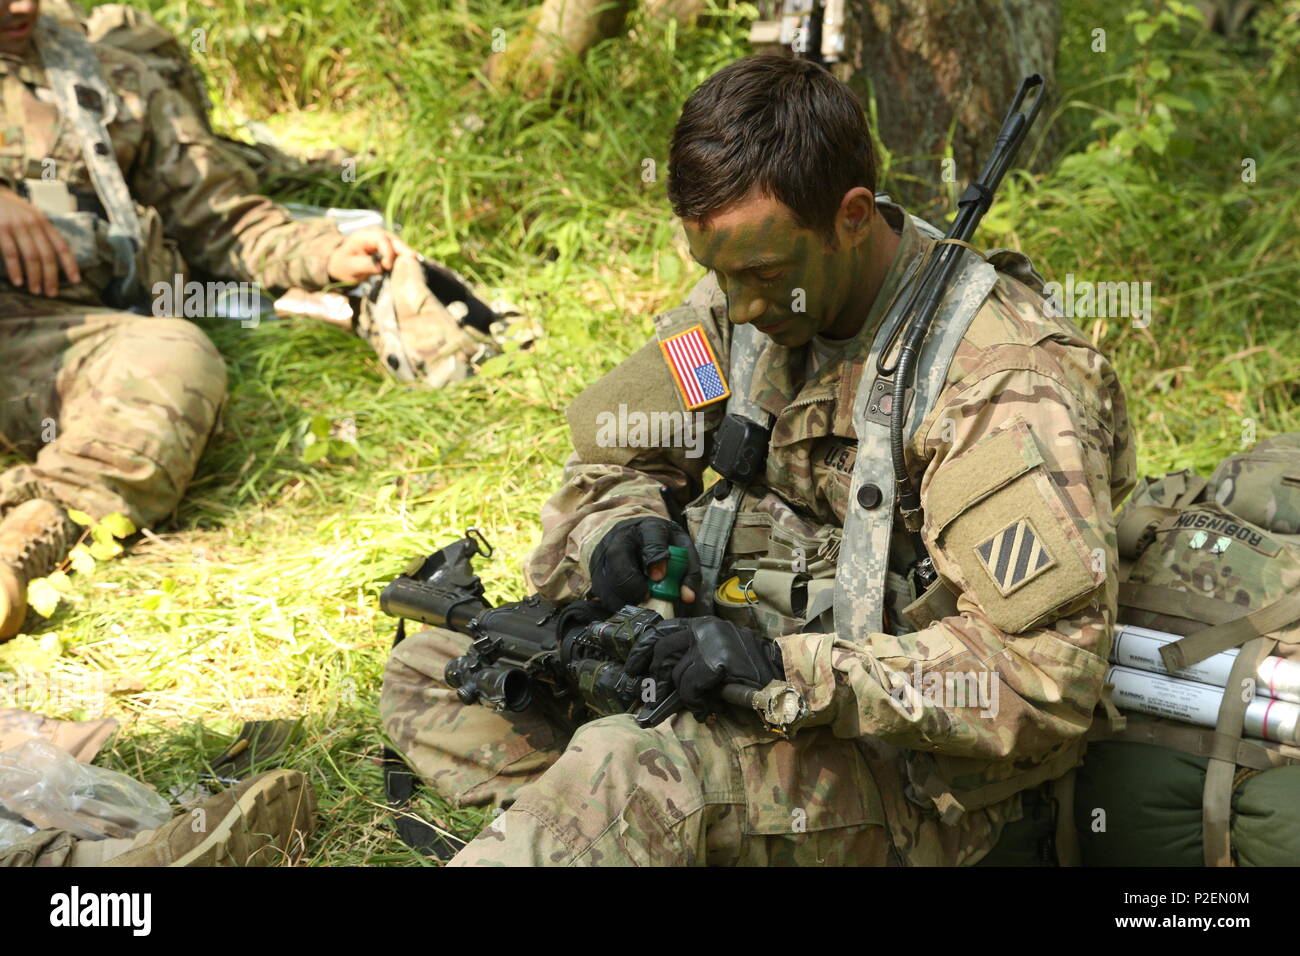 A U.S. Soldier of Charlie Company, 1st Battalion, 30th Infantry Regiment, 2nd Infantry Brigade conducts maintenance on a M4A1 Carbine while conducting a resupply operation during exercise Combined Resolve VII at the U.S. Army’s Joint Multinational Readiness Center in Hohenfels Germany, Sep. 7, 2016. Combined Resolve VII is a 7th Army Training Command, U.S. Army Europe-directed exercise, taking place at the Grafenwoehr and Hohenfels Training Areas, Aug. 8 to Sept. 15, 2016. The exercise is designed to train the Army’s regionally allocated forces to the U.S. European Command. Combined Resolve VI Stock Photo